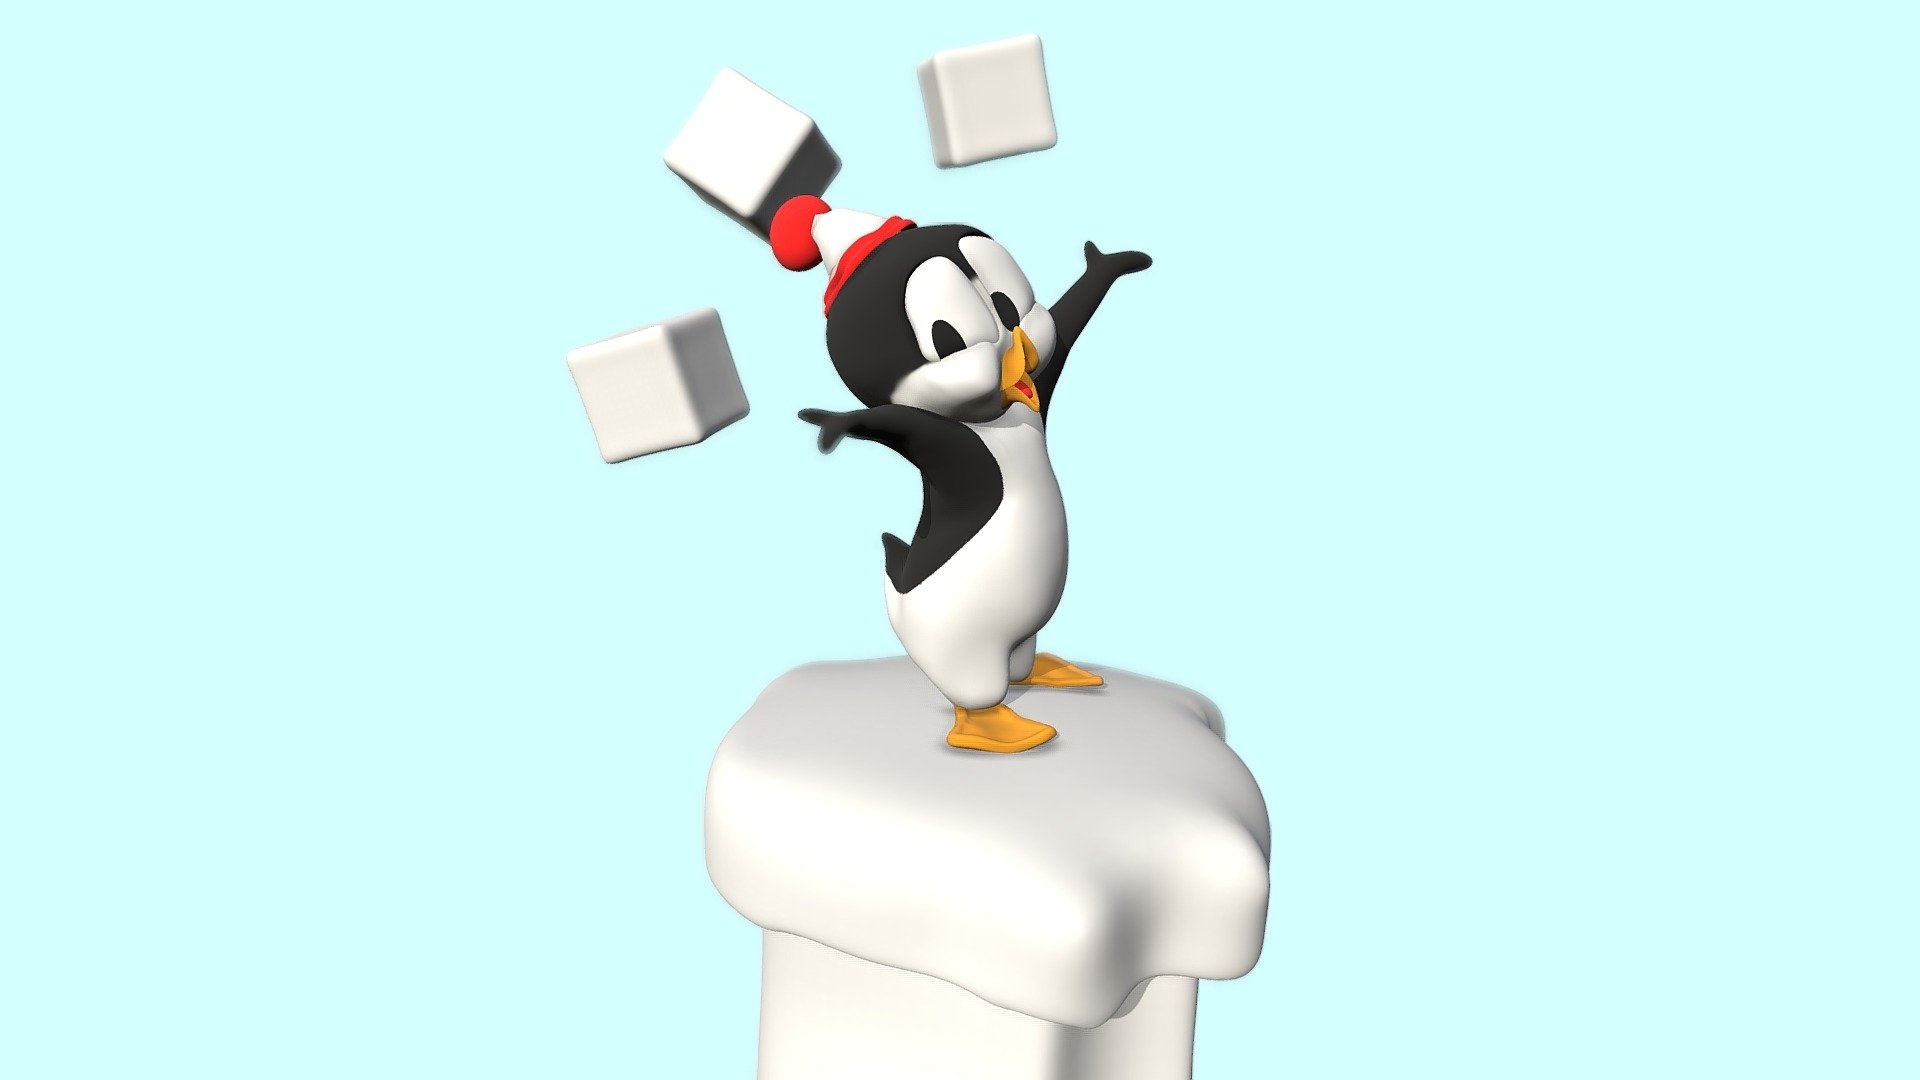 Chilly Willy, Download free 3D model, Cartoon character, Protocept, 1920x1080 Full HD Desktop